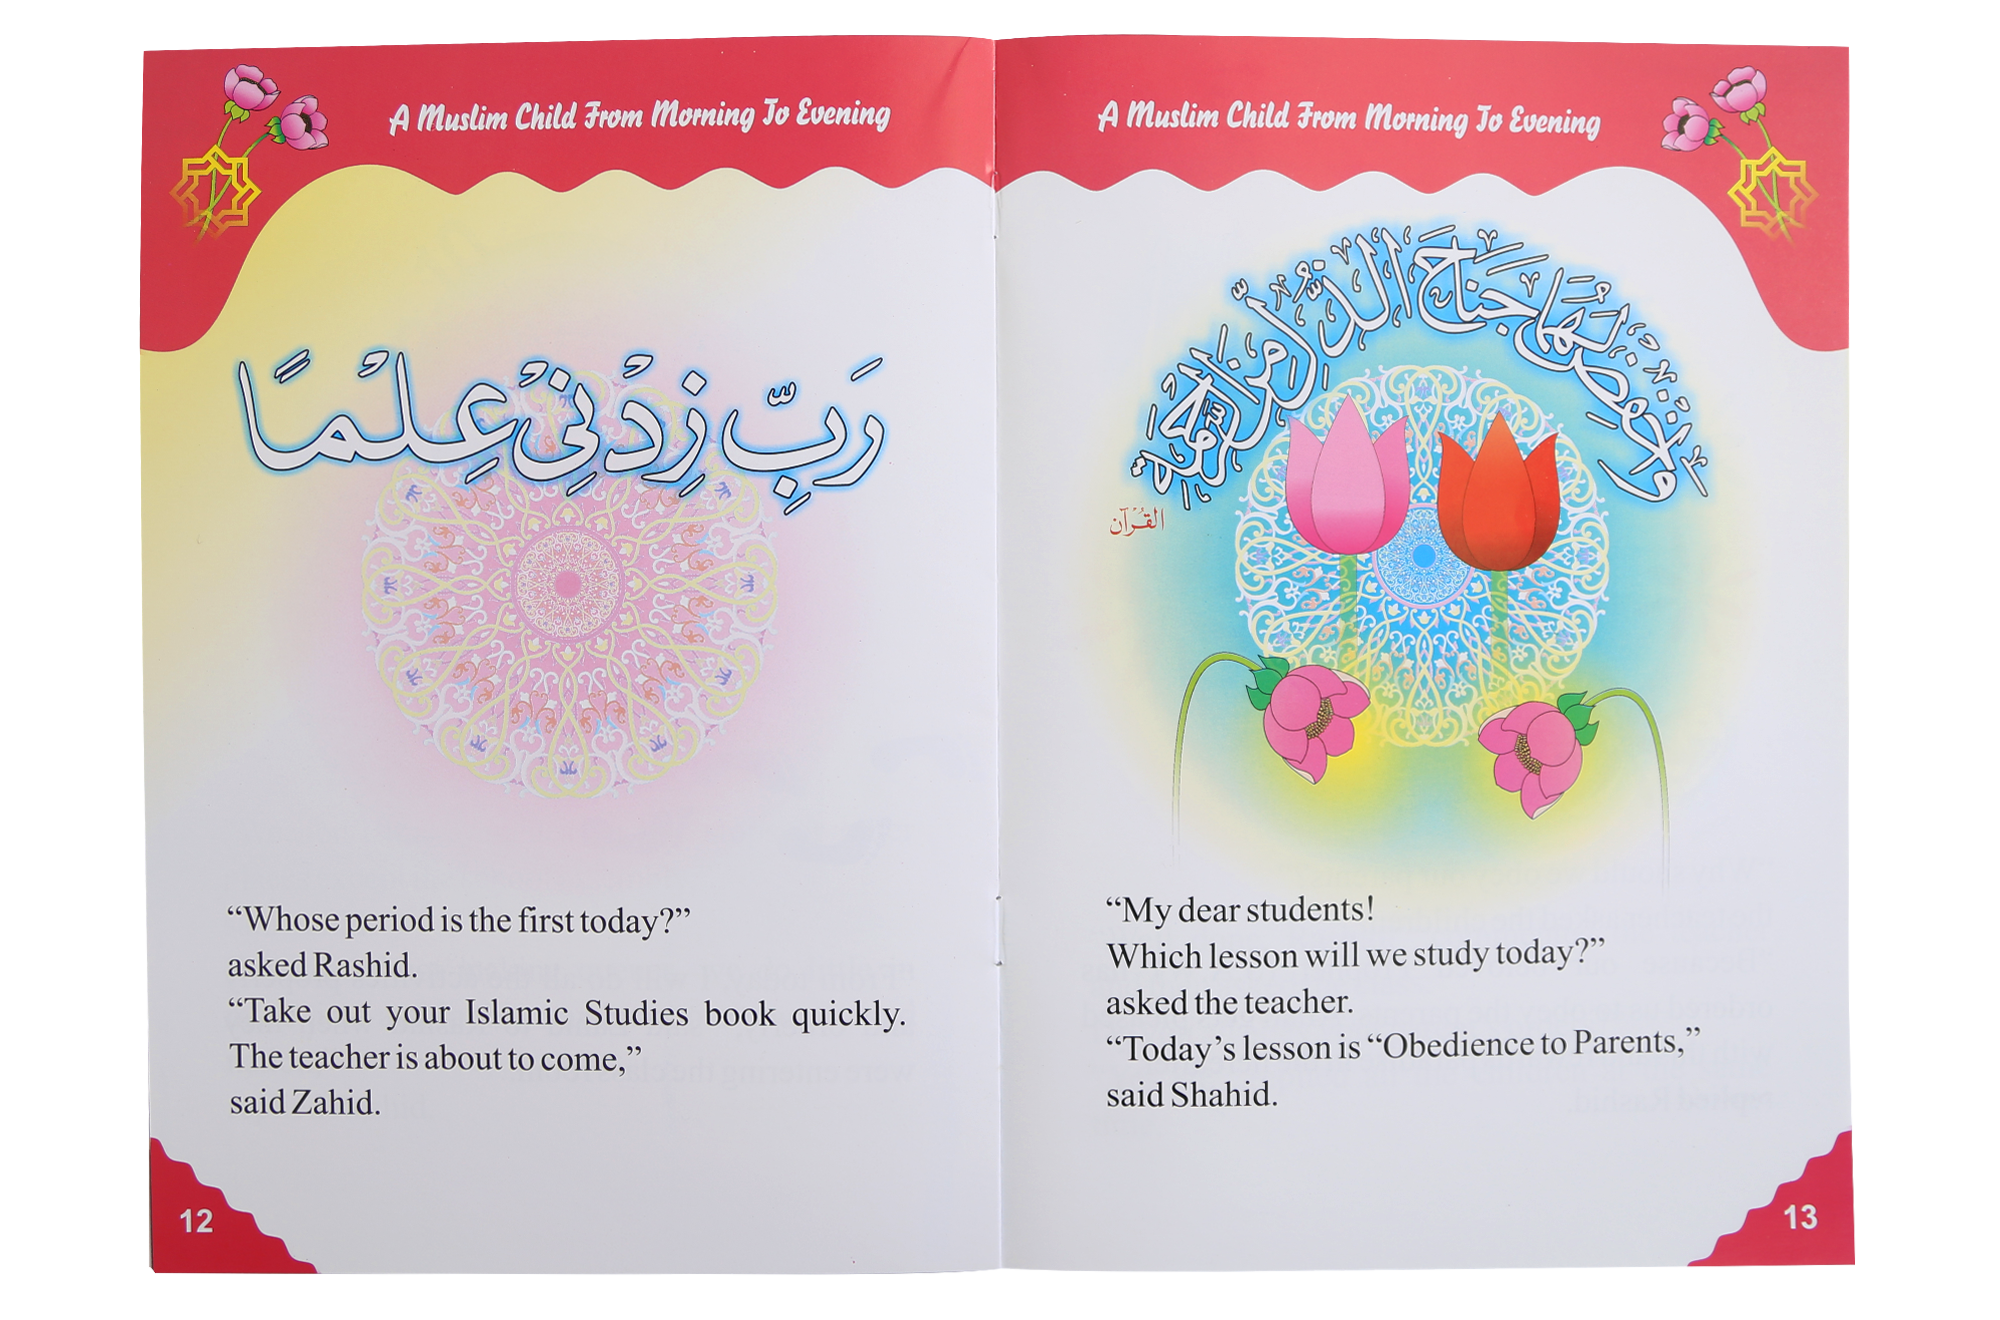 Lifestyle of A Muslim Child - Set of 6 Short Books